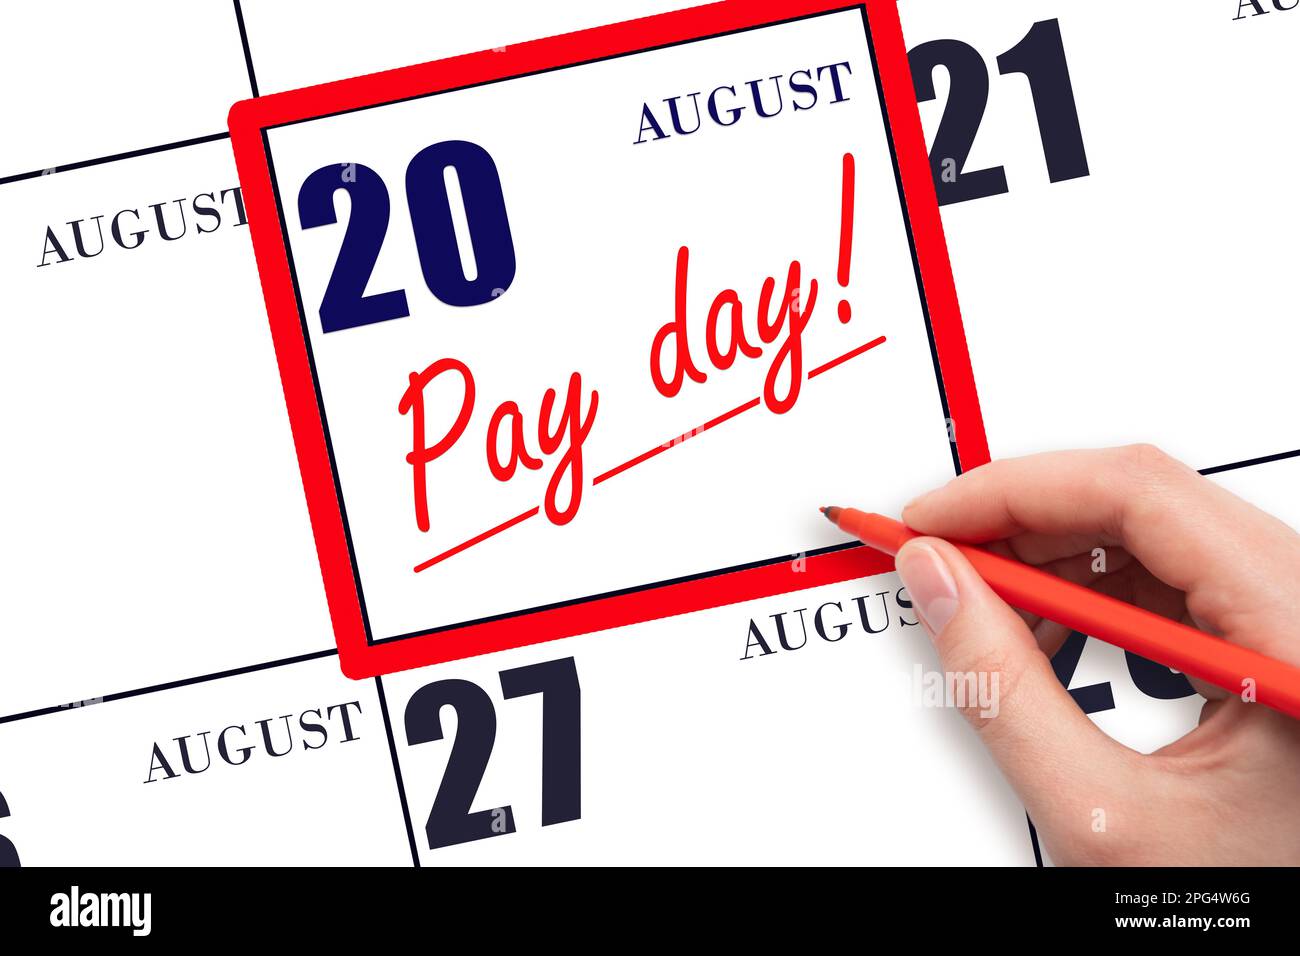 20th day of August. Hand writing text PAY DATE on calendar date August 20 and underline it. Payment due date. Reminder concept of payment. Summer mont Stock Photo